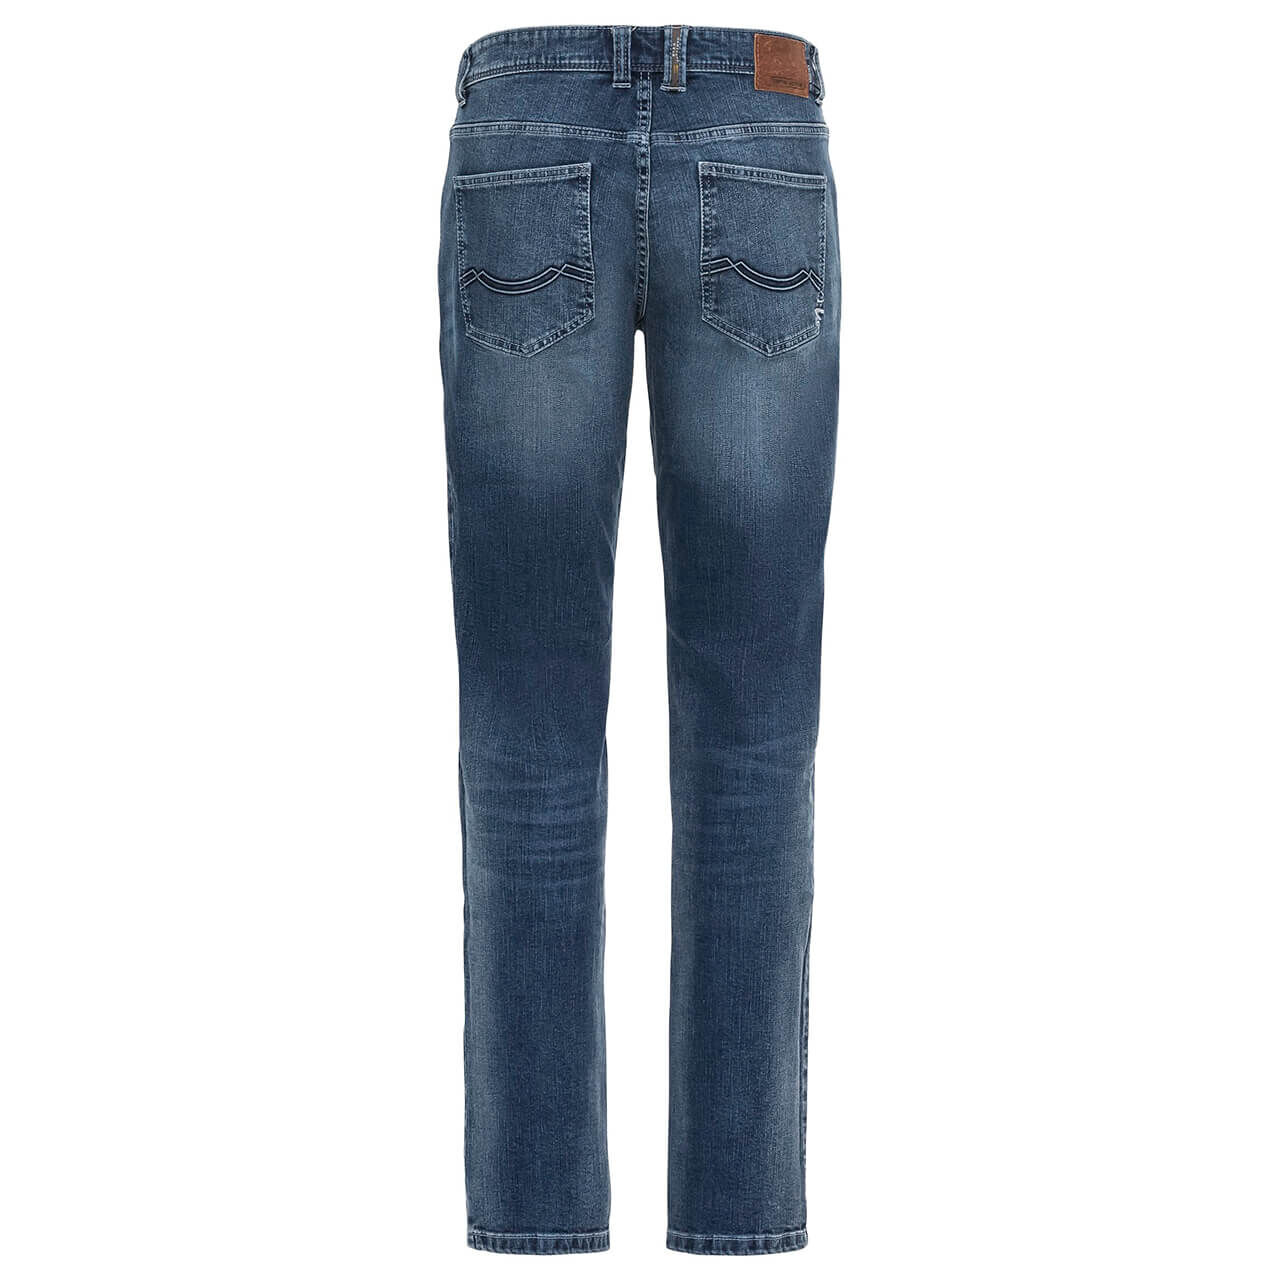 Camel active Woodstock Jeans mid blue